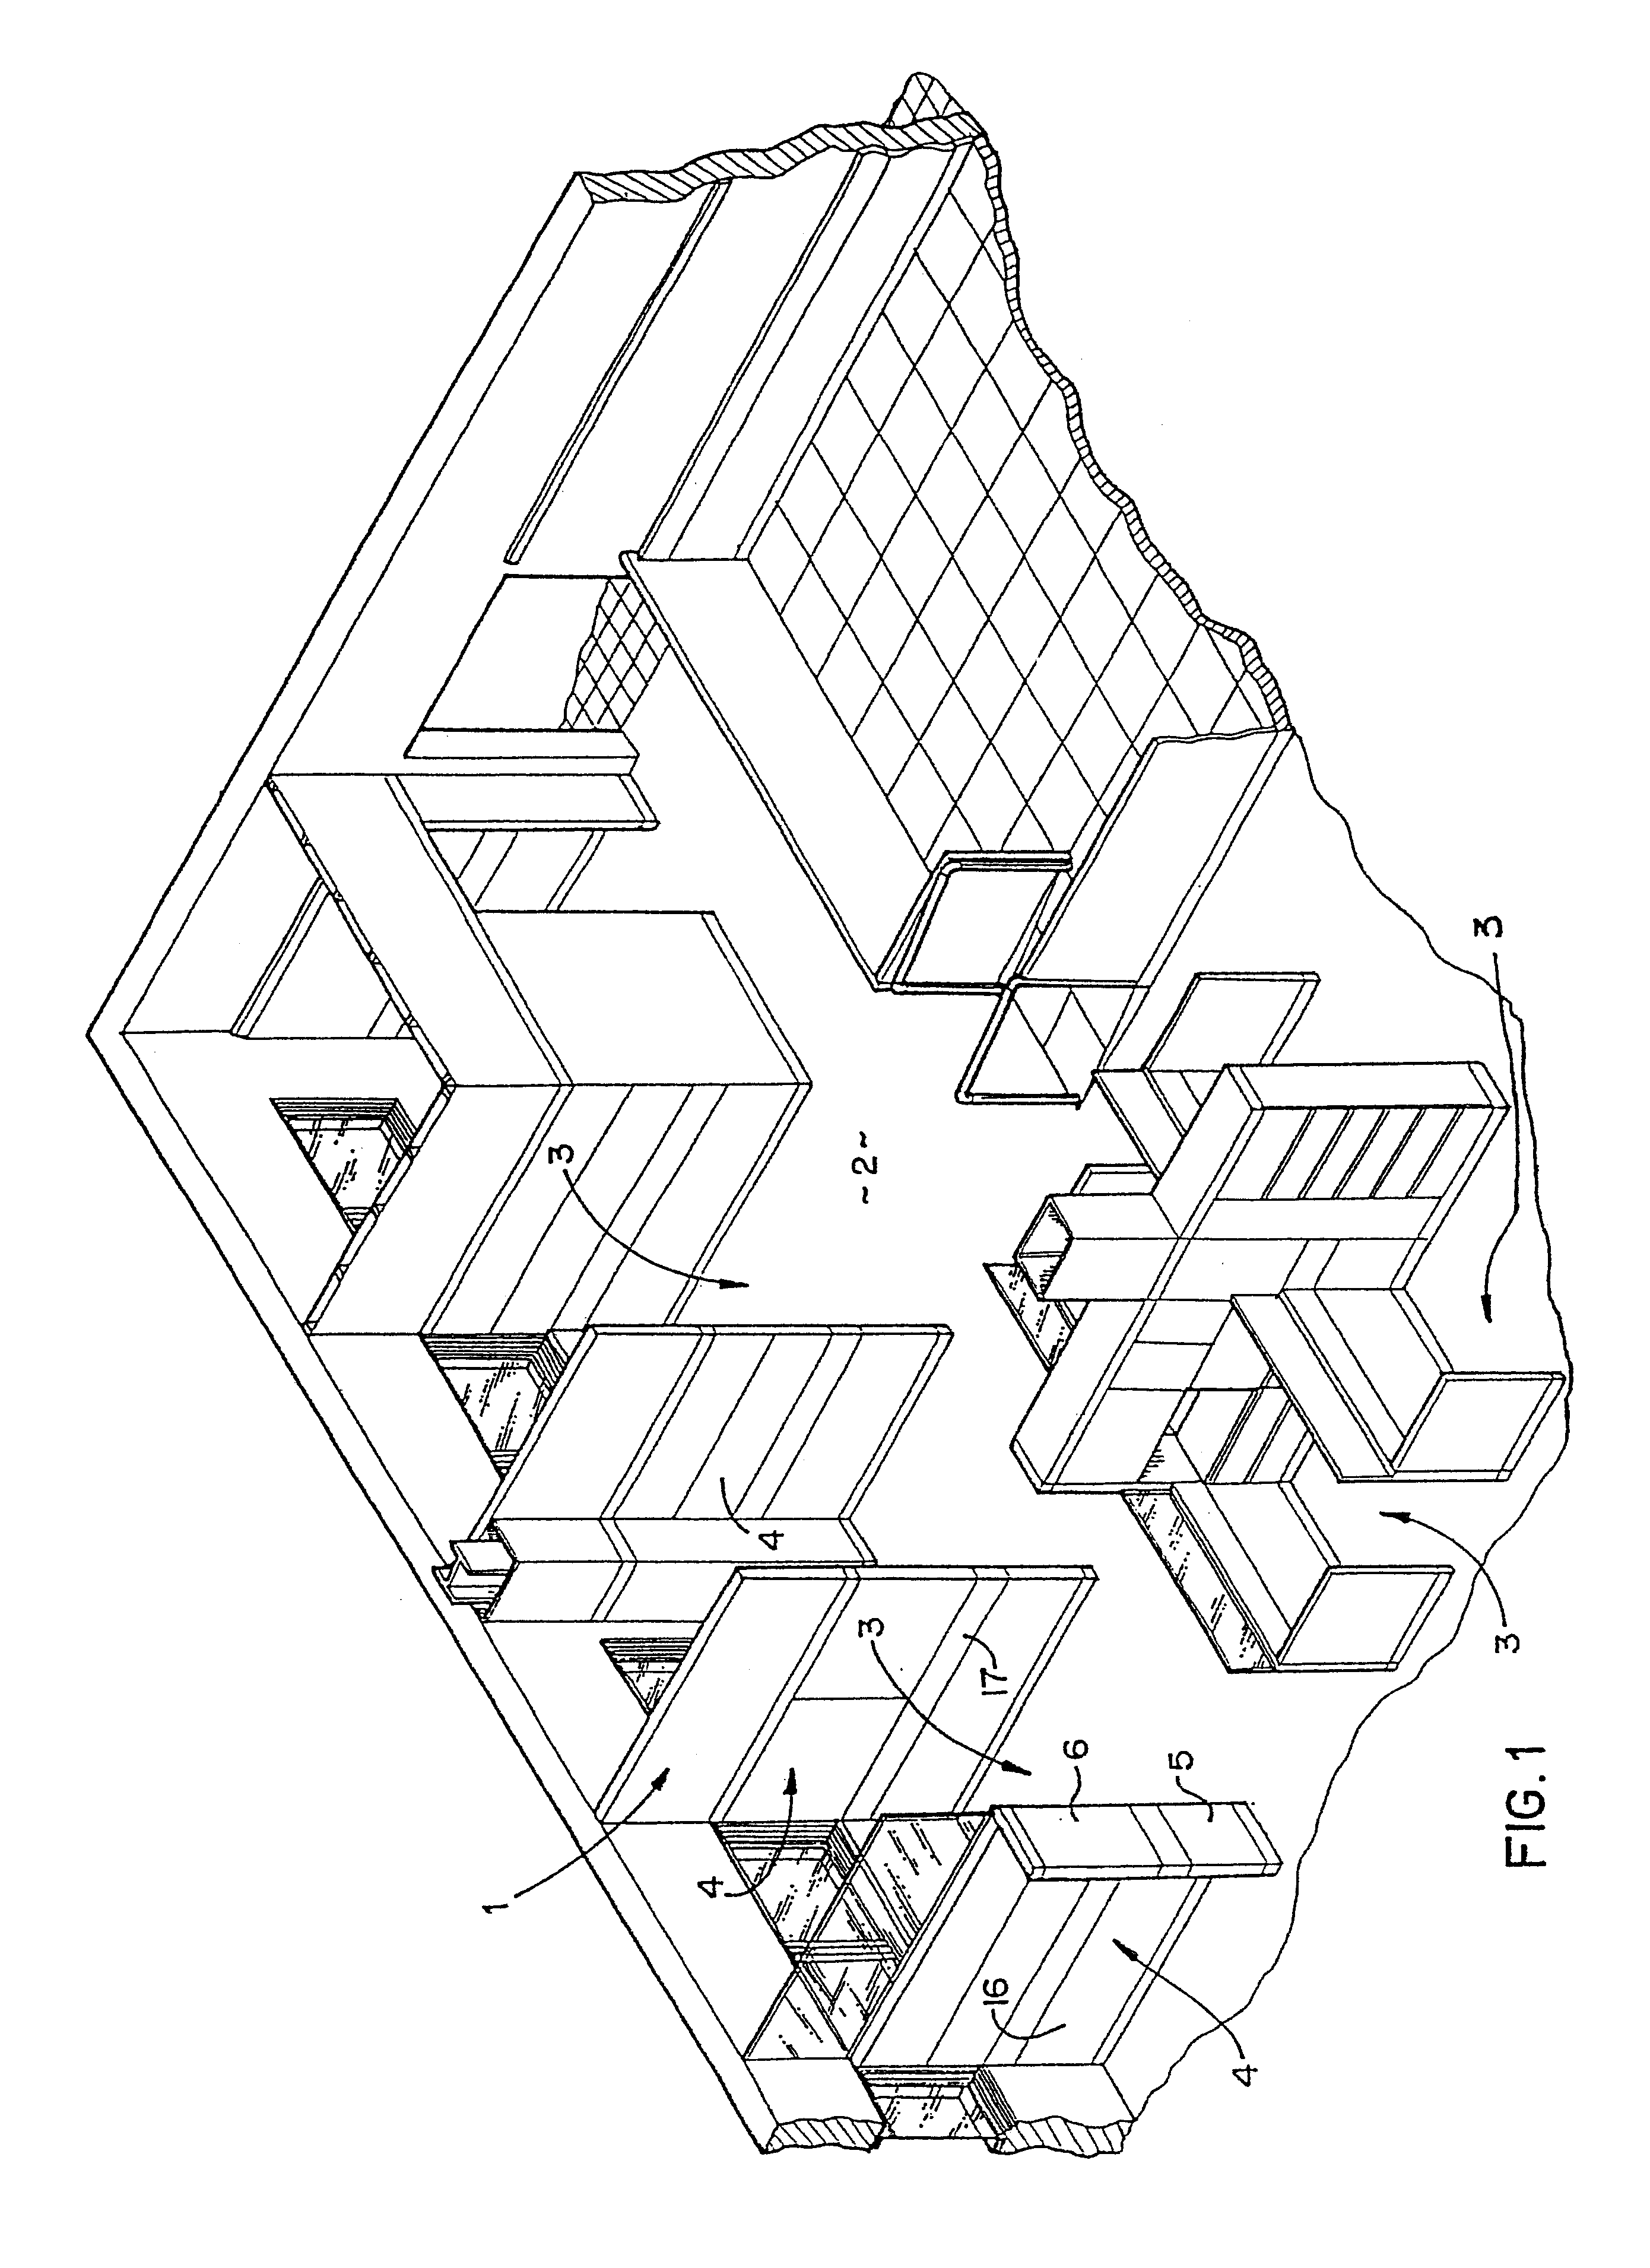 Method of connecting partition panels